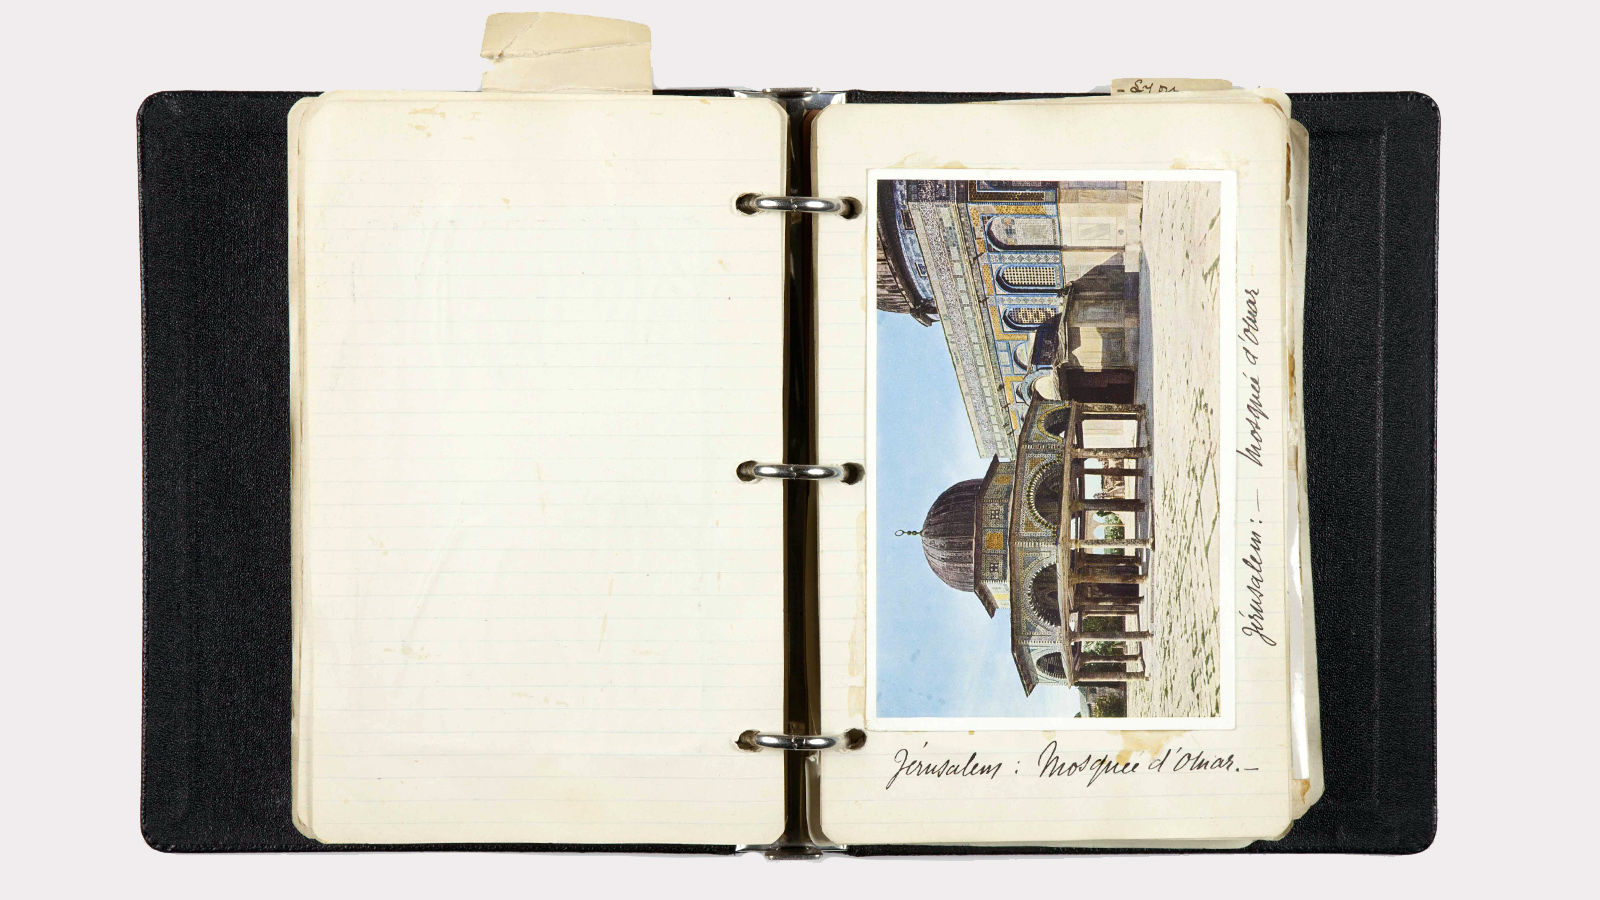 Postcards featuring the Colossi of Memnon (Egypt) and a view of Jerusalem. Travel diary of Calouste Gulbenkian, 1934.